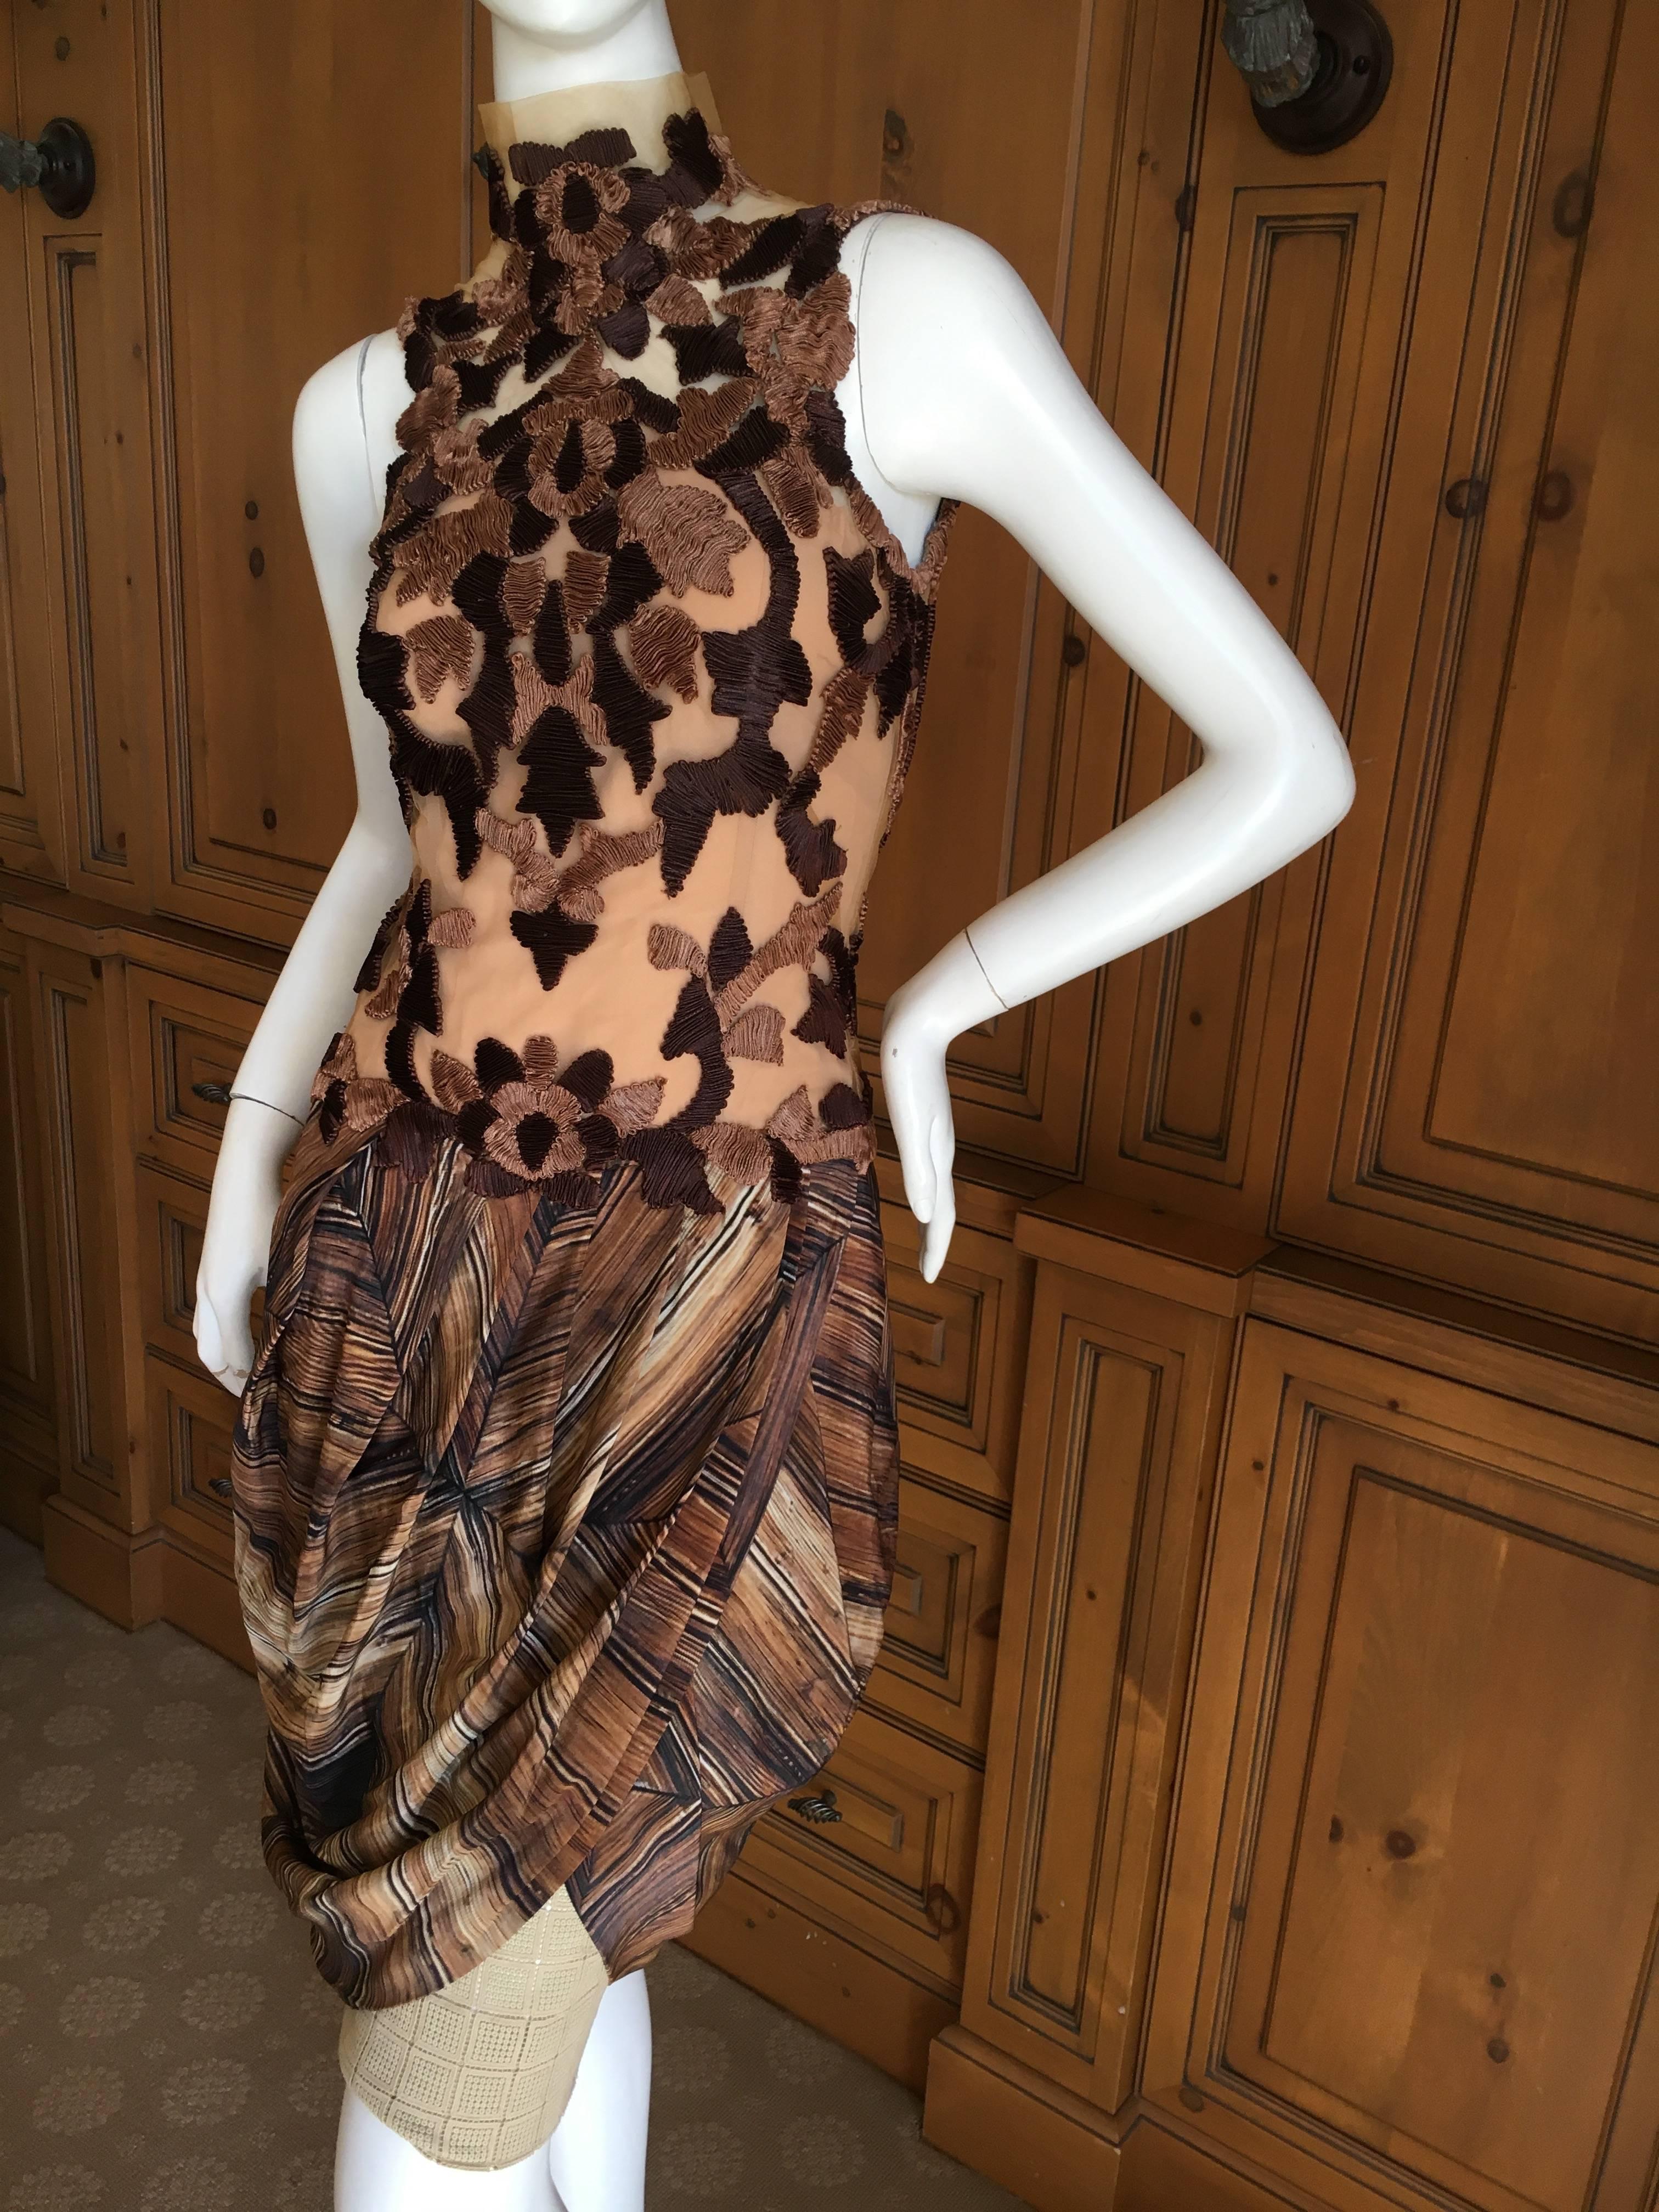 Rodarte Sleeveless Wood Grain Dress with Applique Top Spring 2011 In Excellent Condition For Sale In Cloverdale, CA